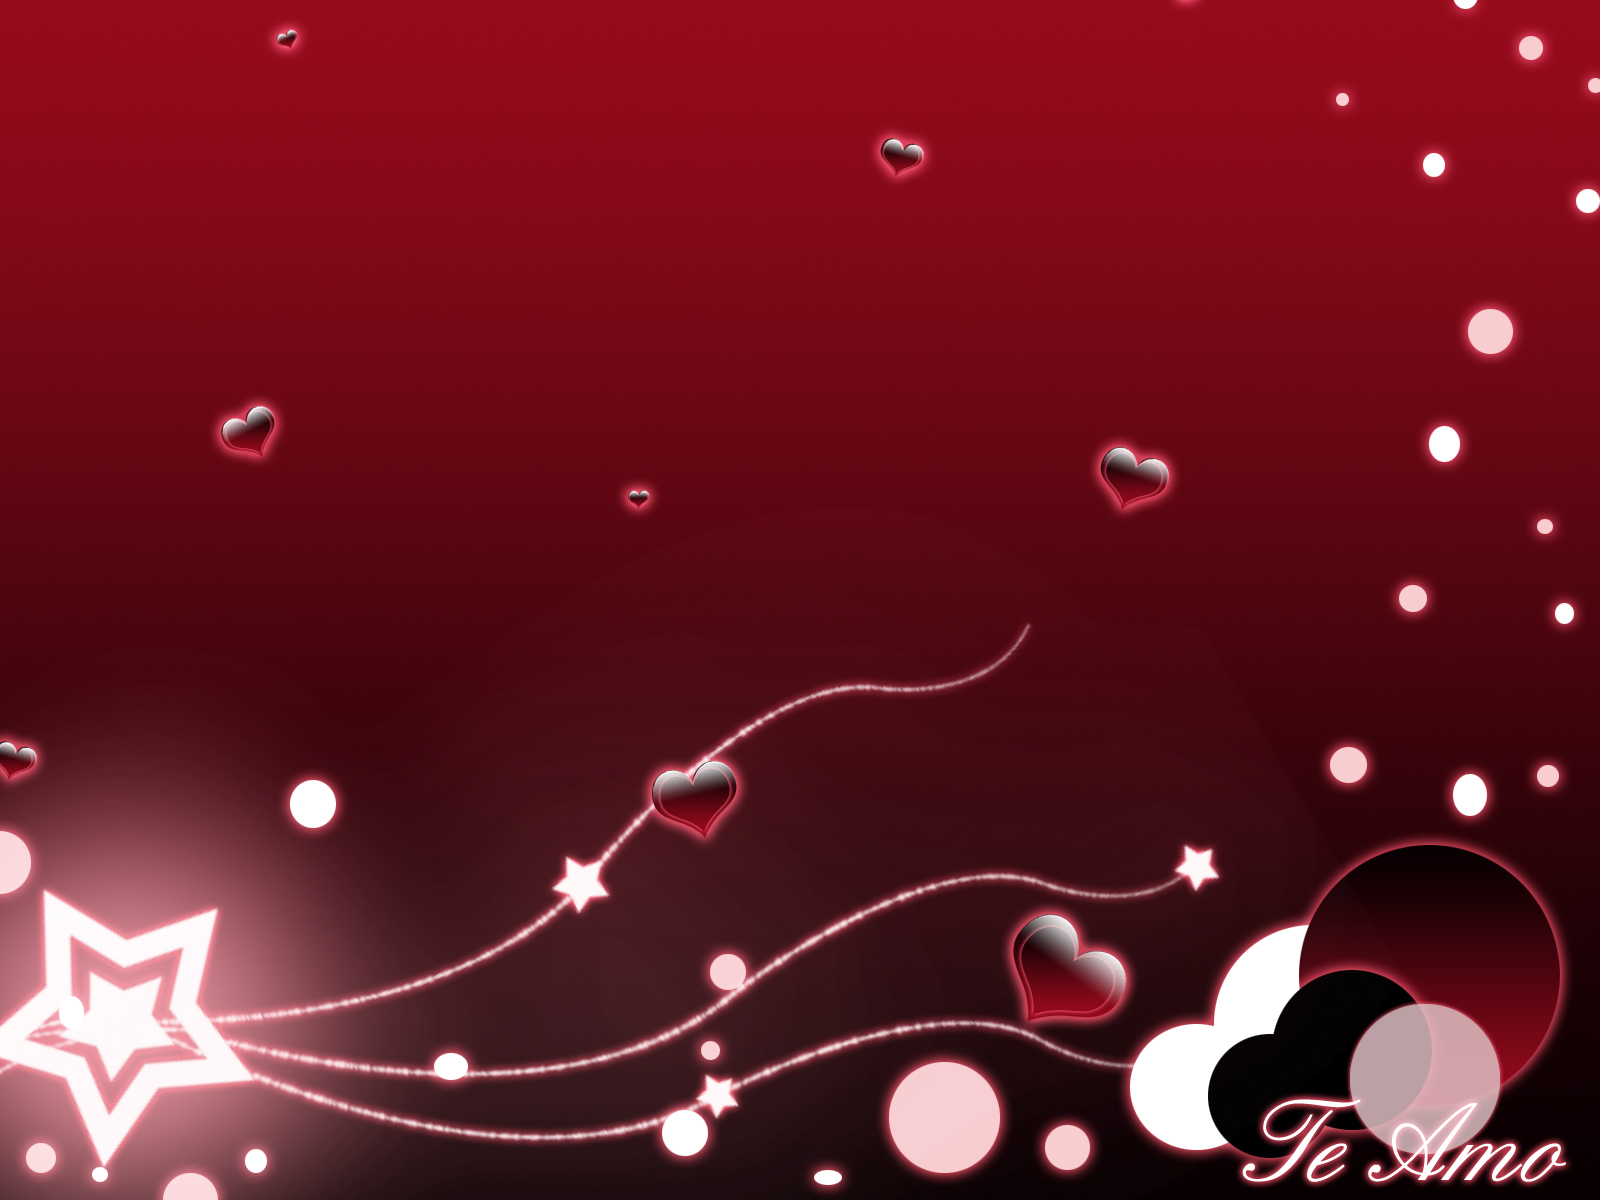 Happy Valentines Day Wallpaper For Beautiful